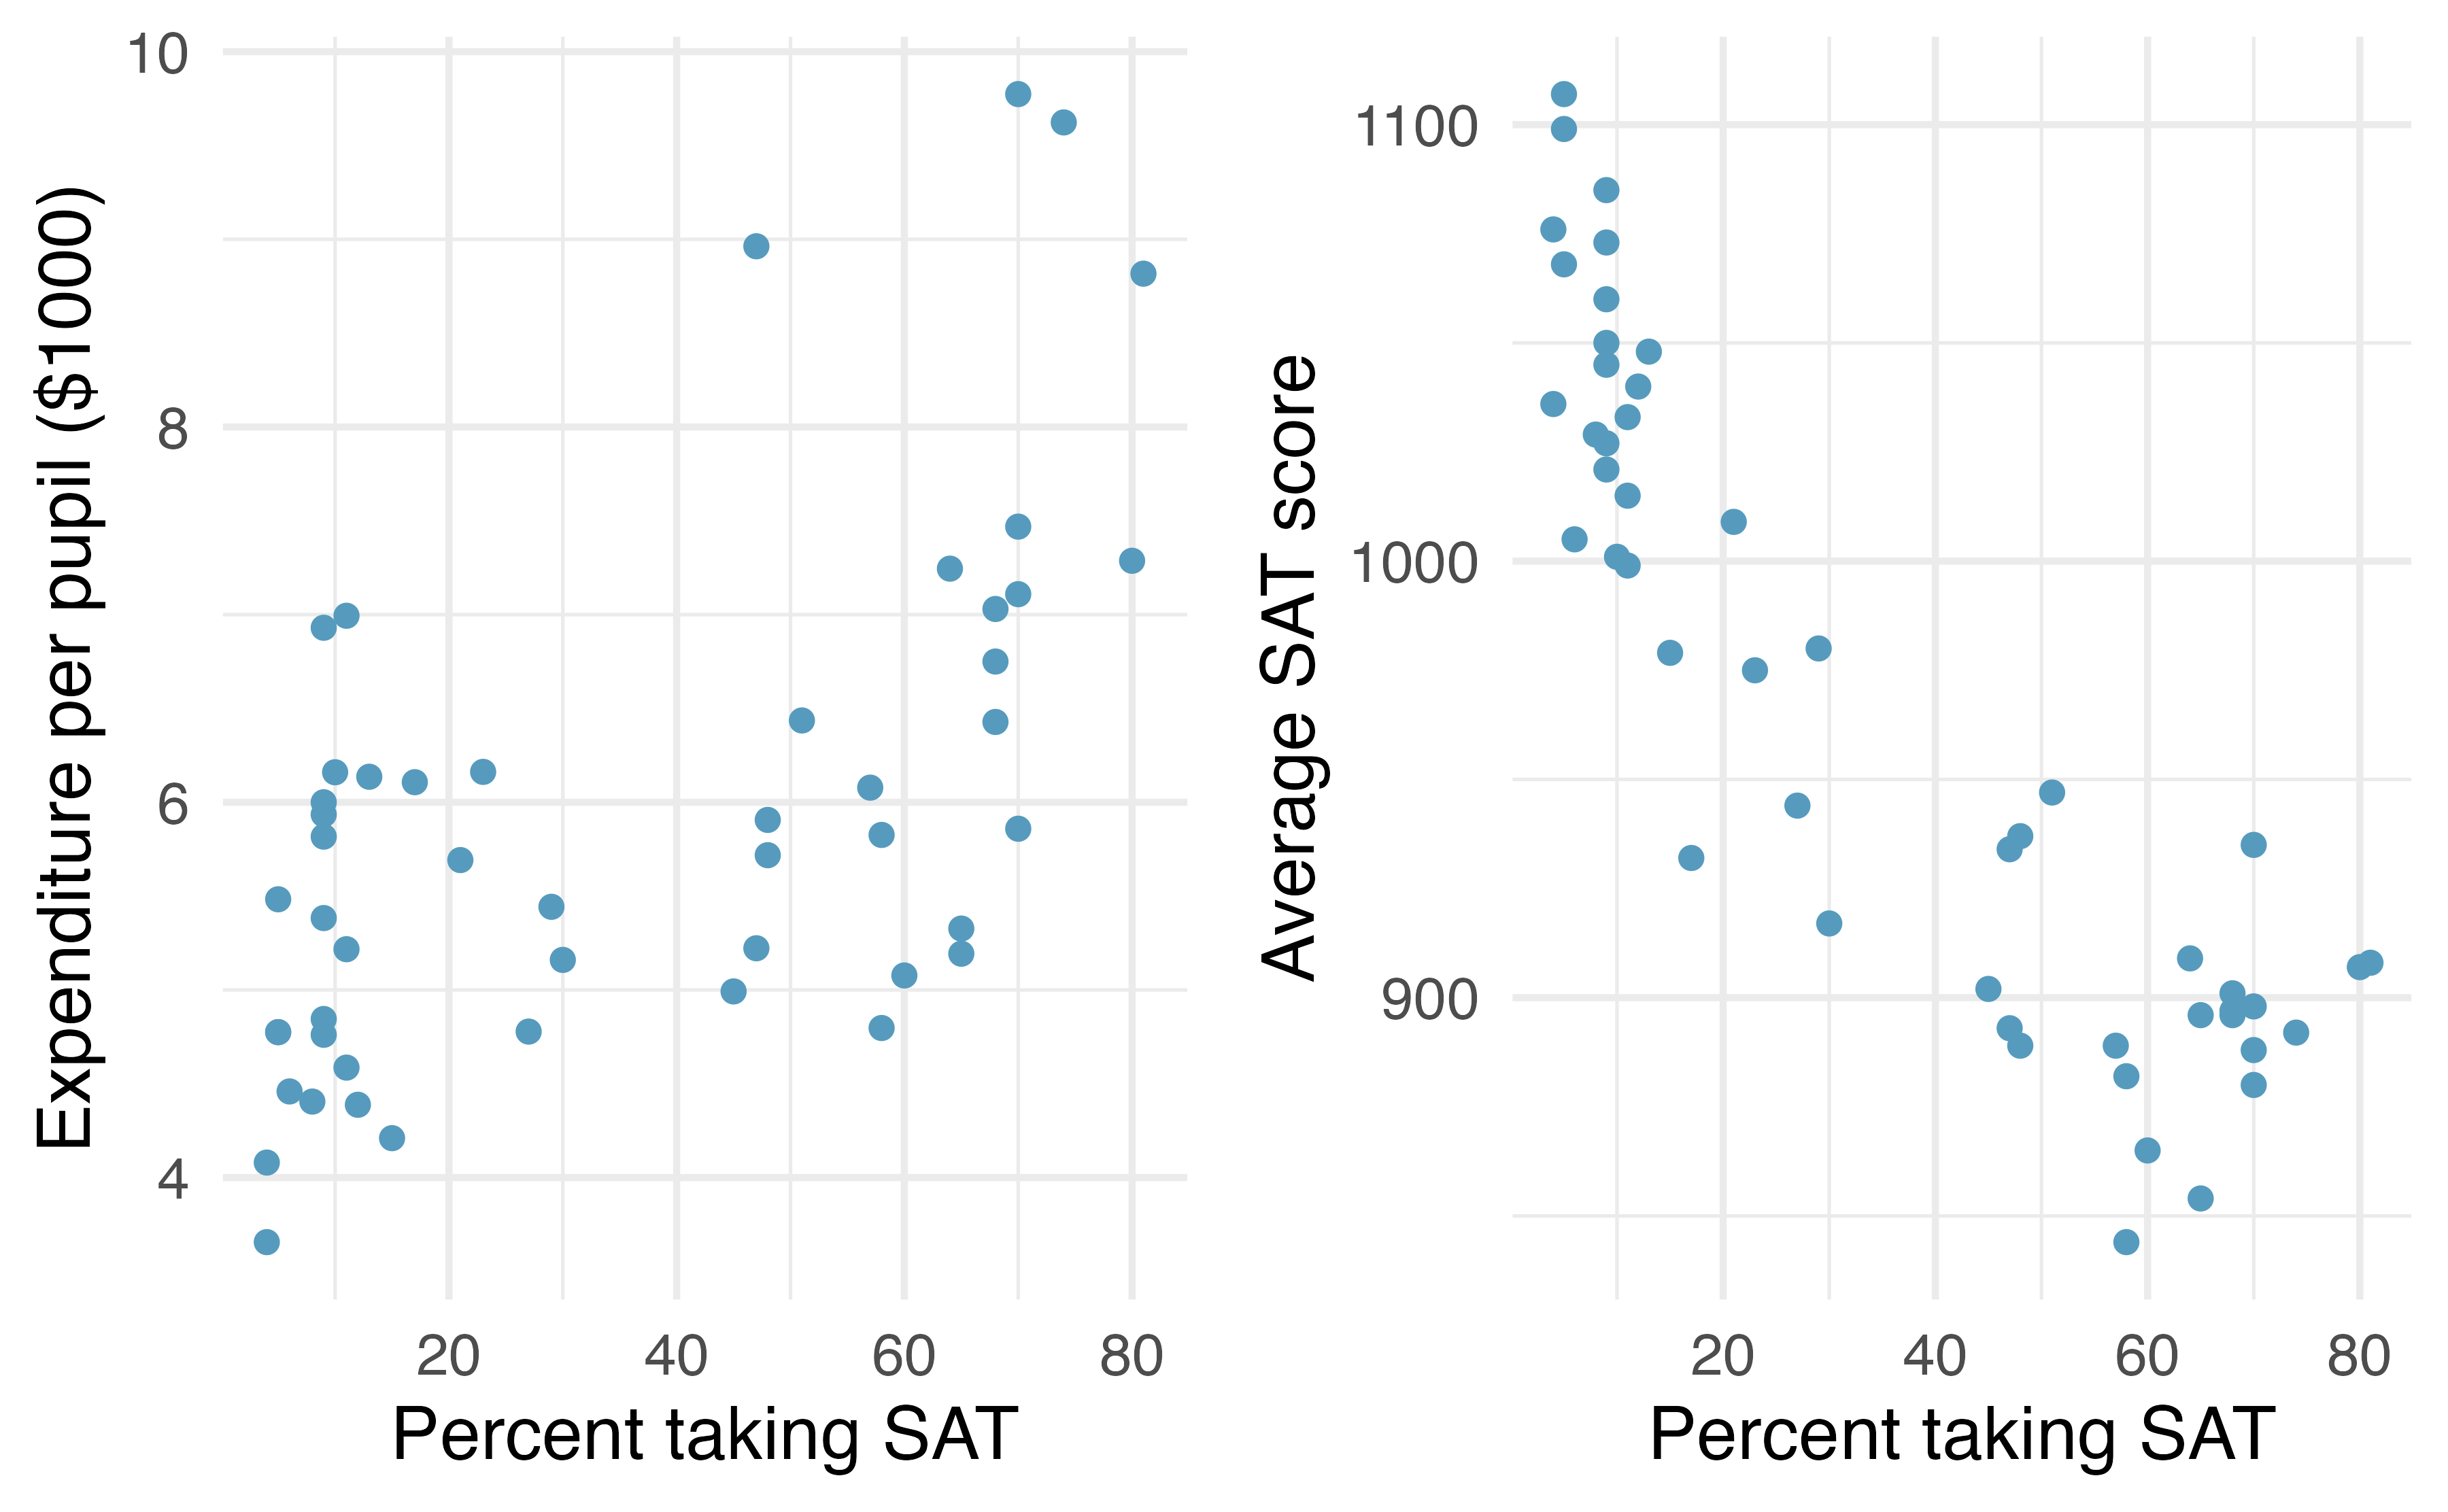 Expenditure per pupil in average daily attendance in public elementary and secondary schools ($1000) and average SAT score plotted against percent of students taking the SAT for the 50 states plus the District of Columbia over school year 1994-1995.